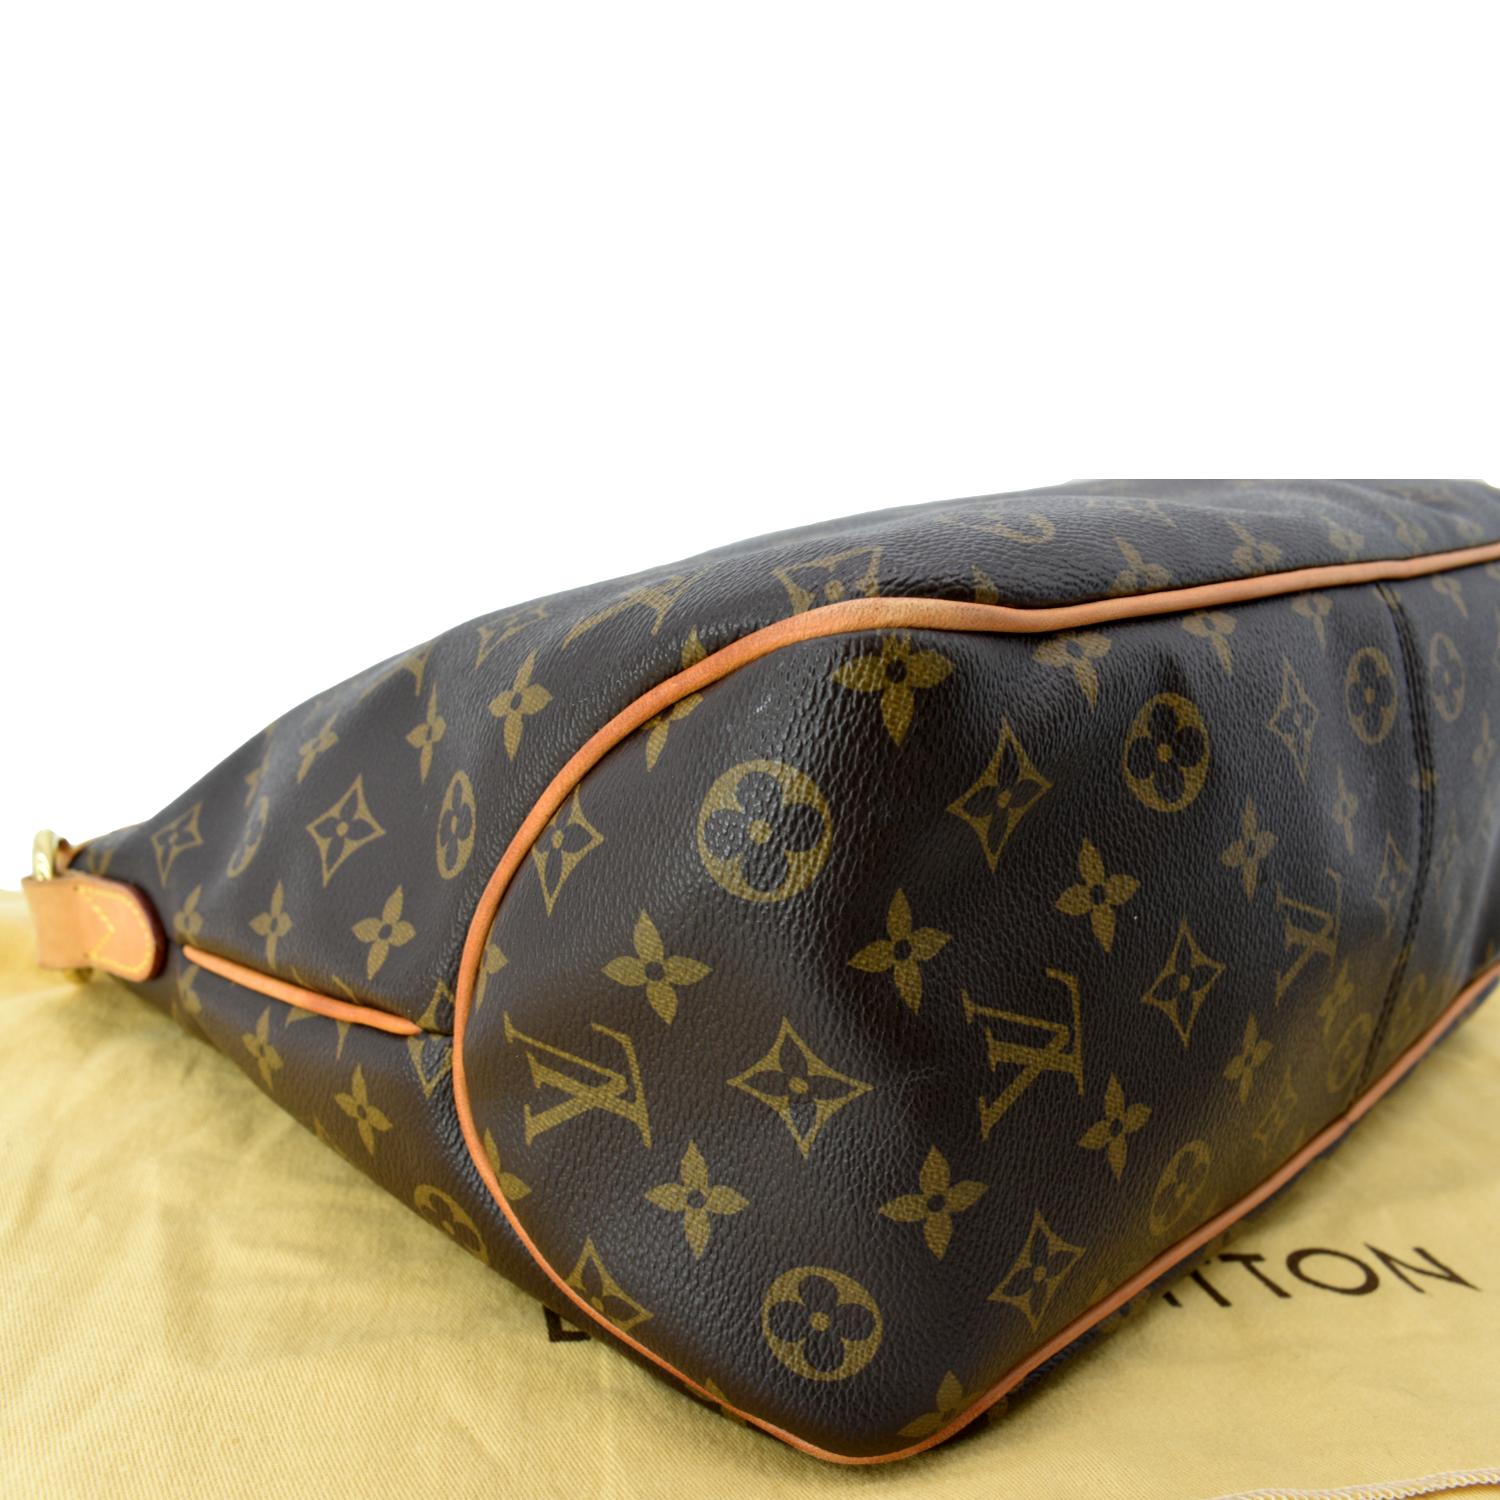 Delightful leather handbag Louis Vuitton Brown in Leather - 35935247